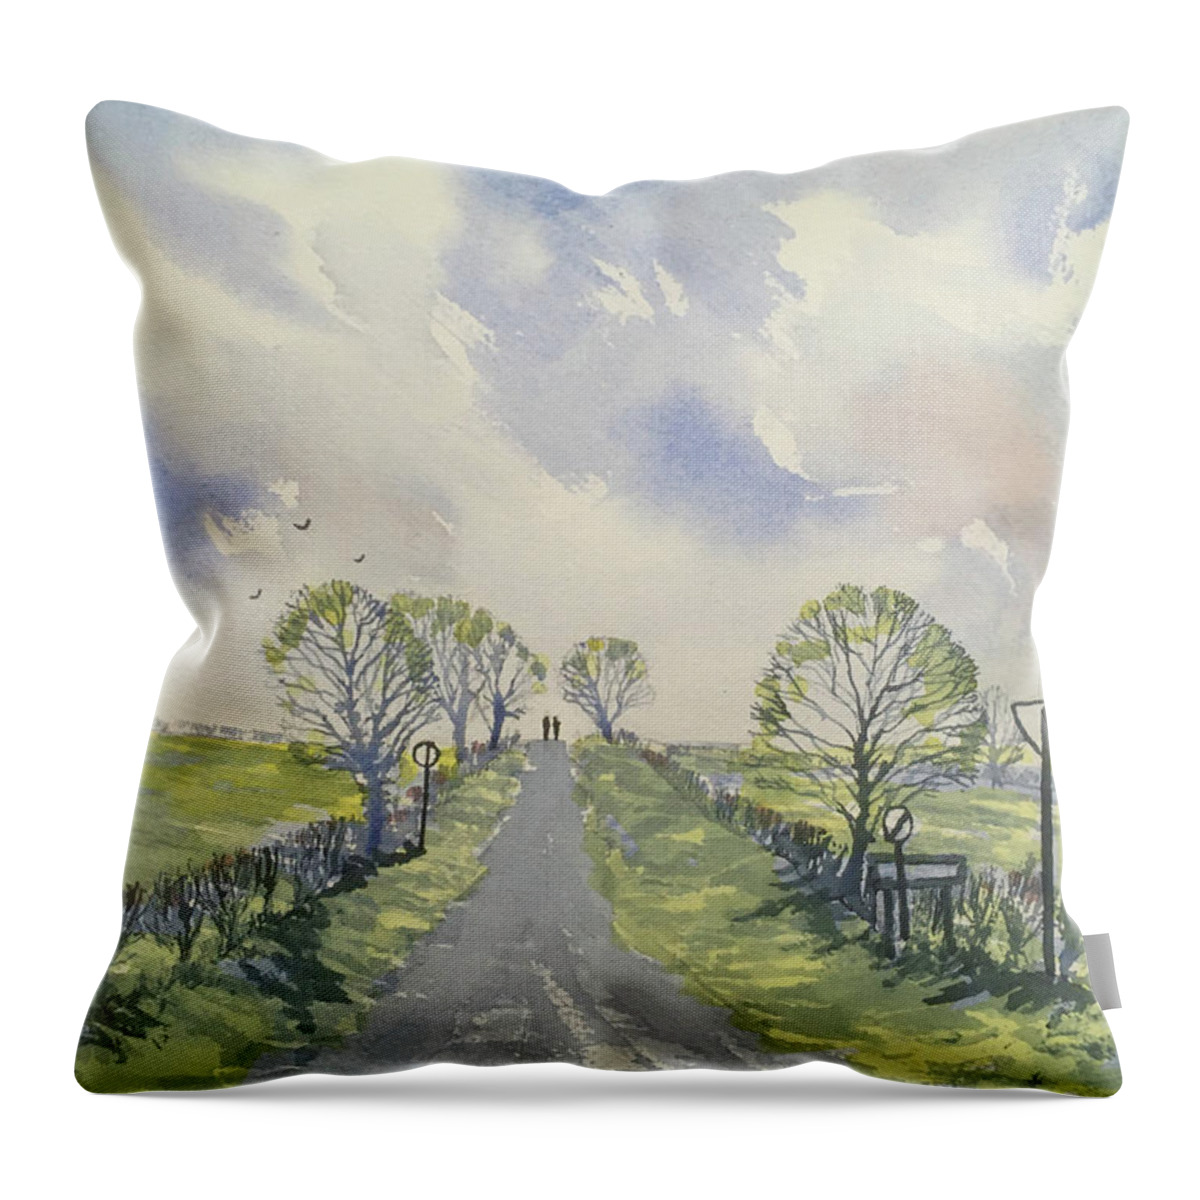 Watercolour Throw Pillow featuring the painting Spring Sky over York Road, Kilham by Glenn Marshall